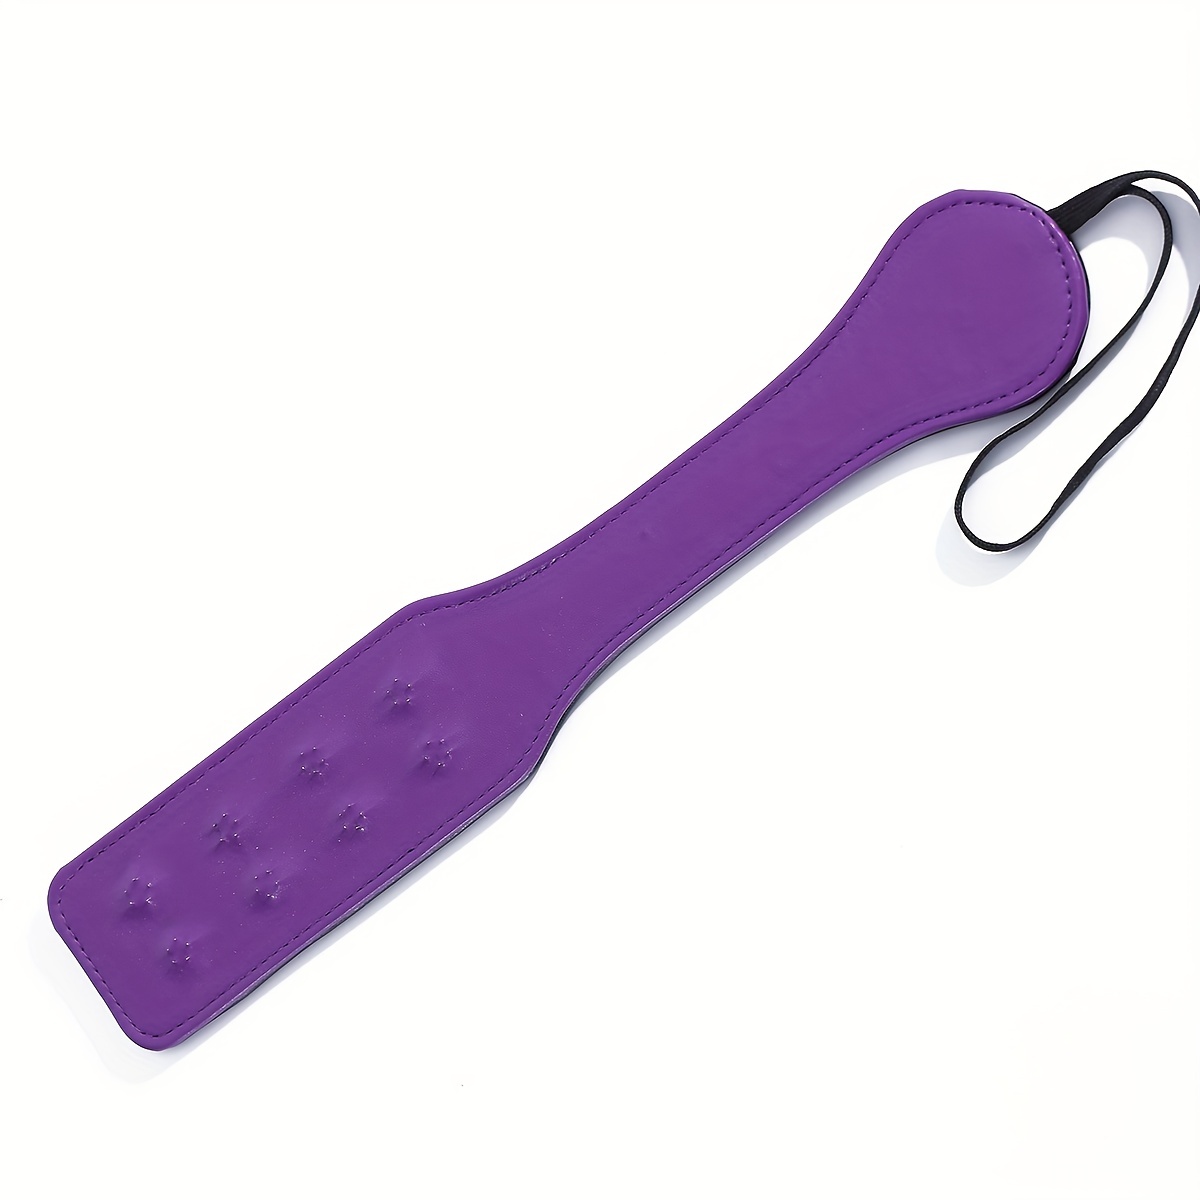 New sm Butt-Spanking Paddle Sex Play Sex Toy Adult Toy Paddle Tease Black  and red Leather Double Hand clap Sexy Couples Foreplay Small Paddles